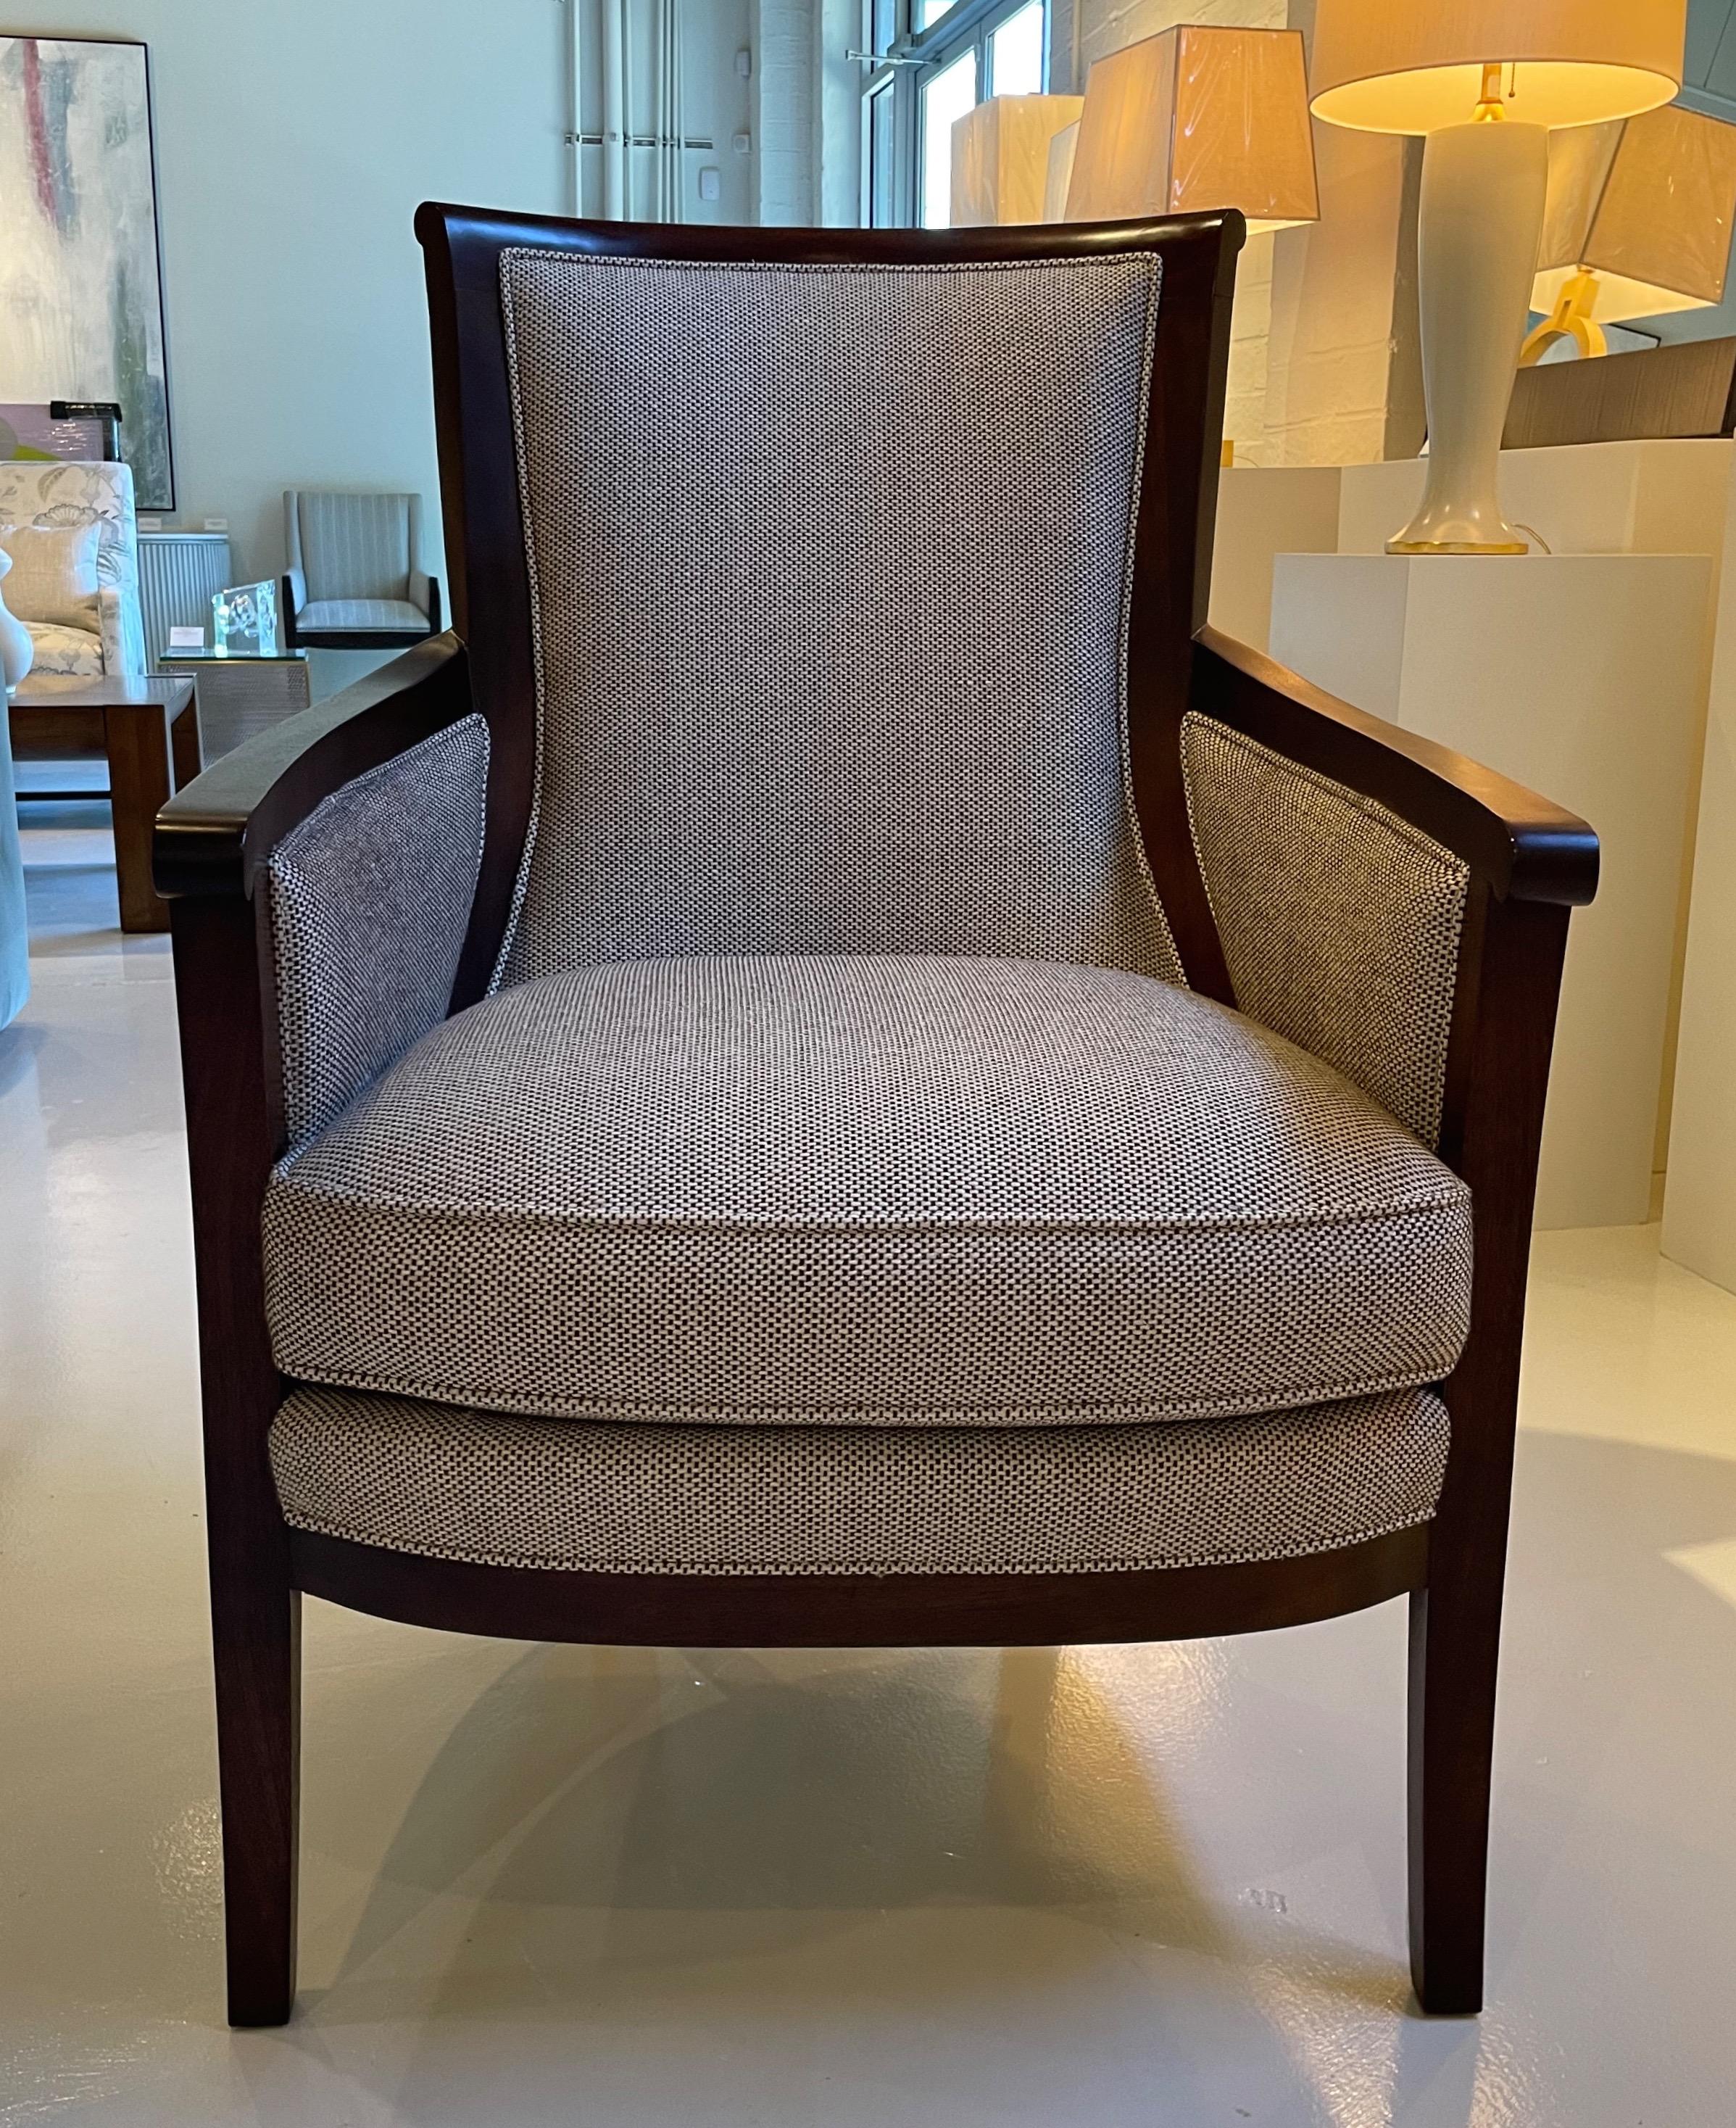 Showroom new - Hickory chair breck chair - Like the antique that inspired it, the Breck Chair features a crisp, modern profile accentuated by an exposed wood frame with graceful curvilinear wood back supports. Spring down seat cushion for comfort